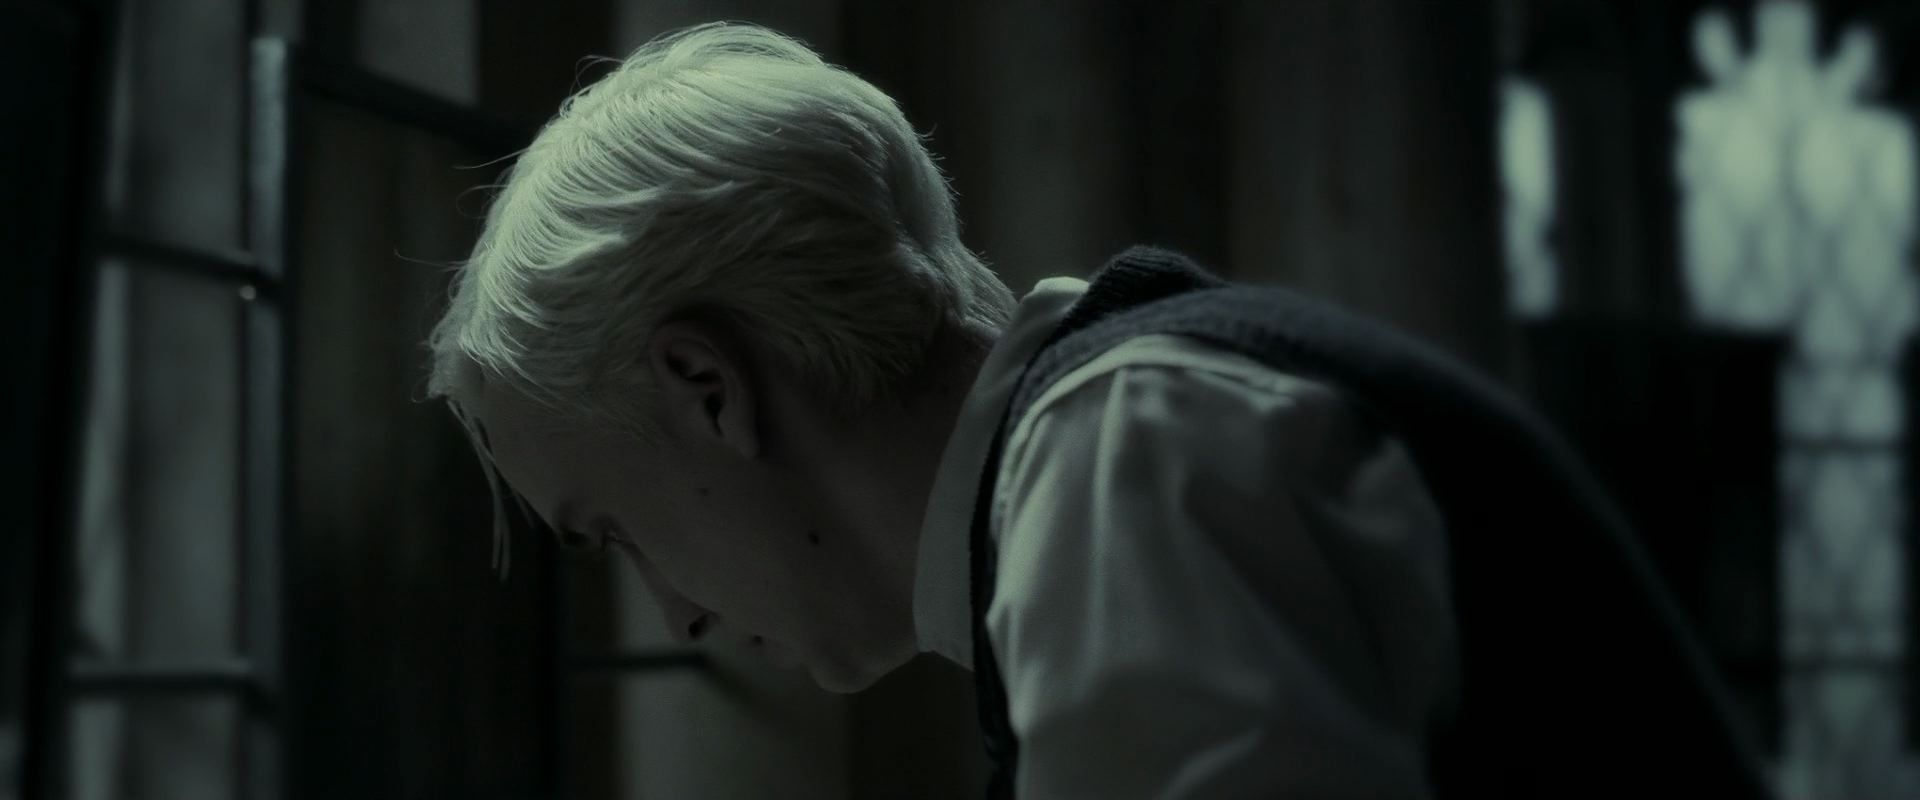 10 Draco Malfoy wallpapers